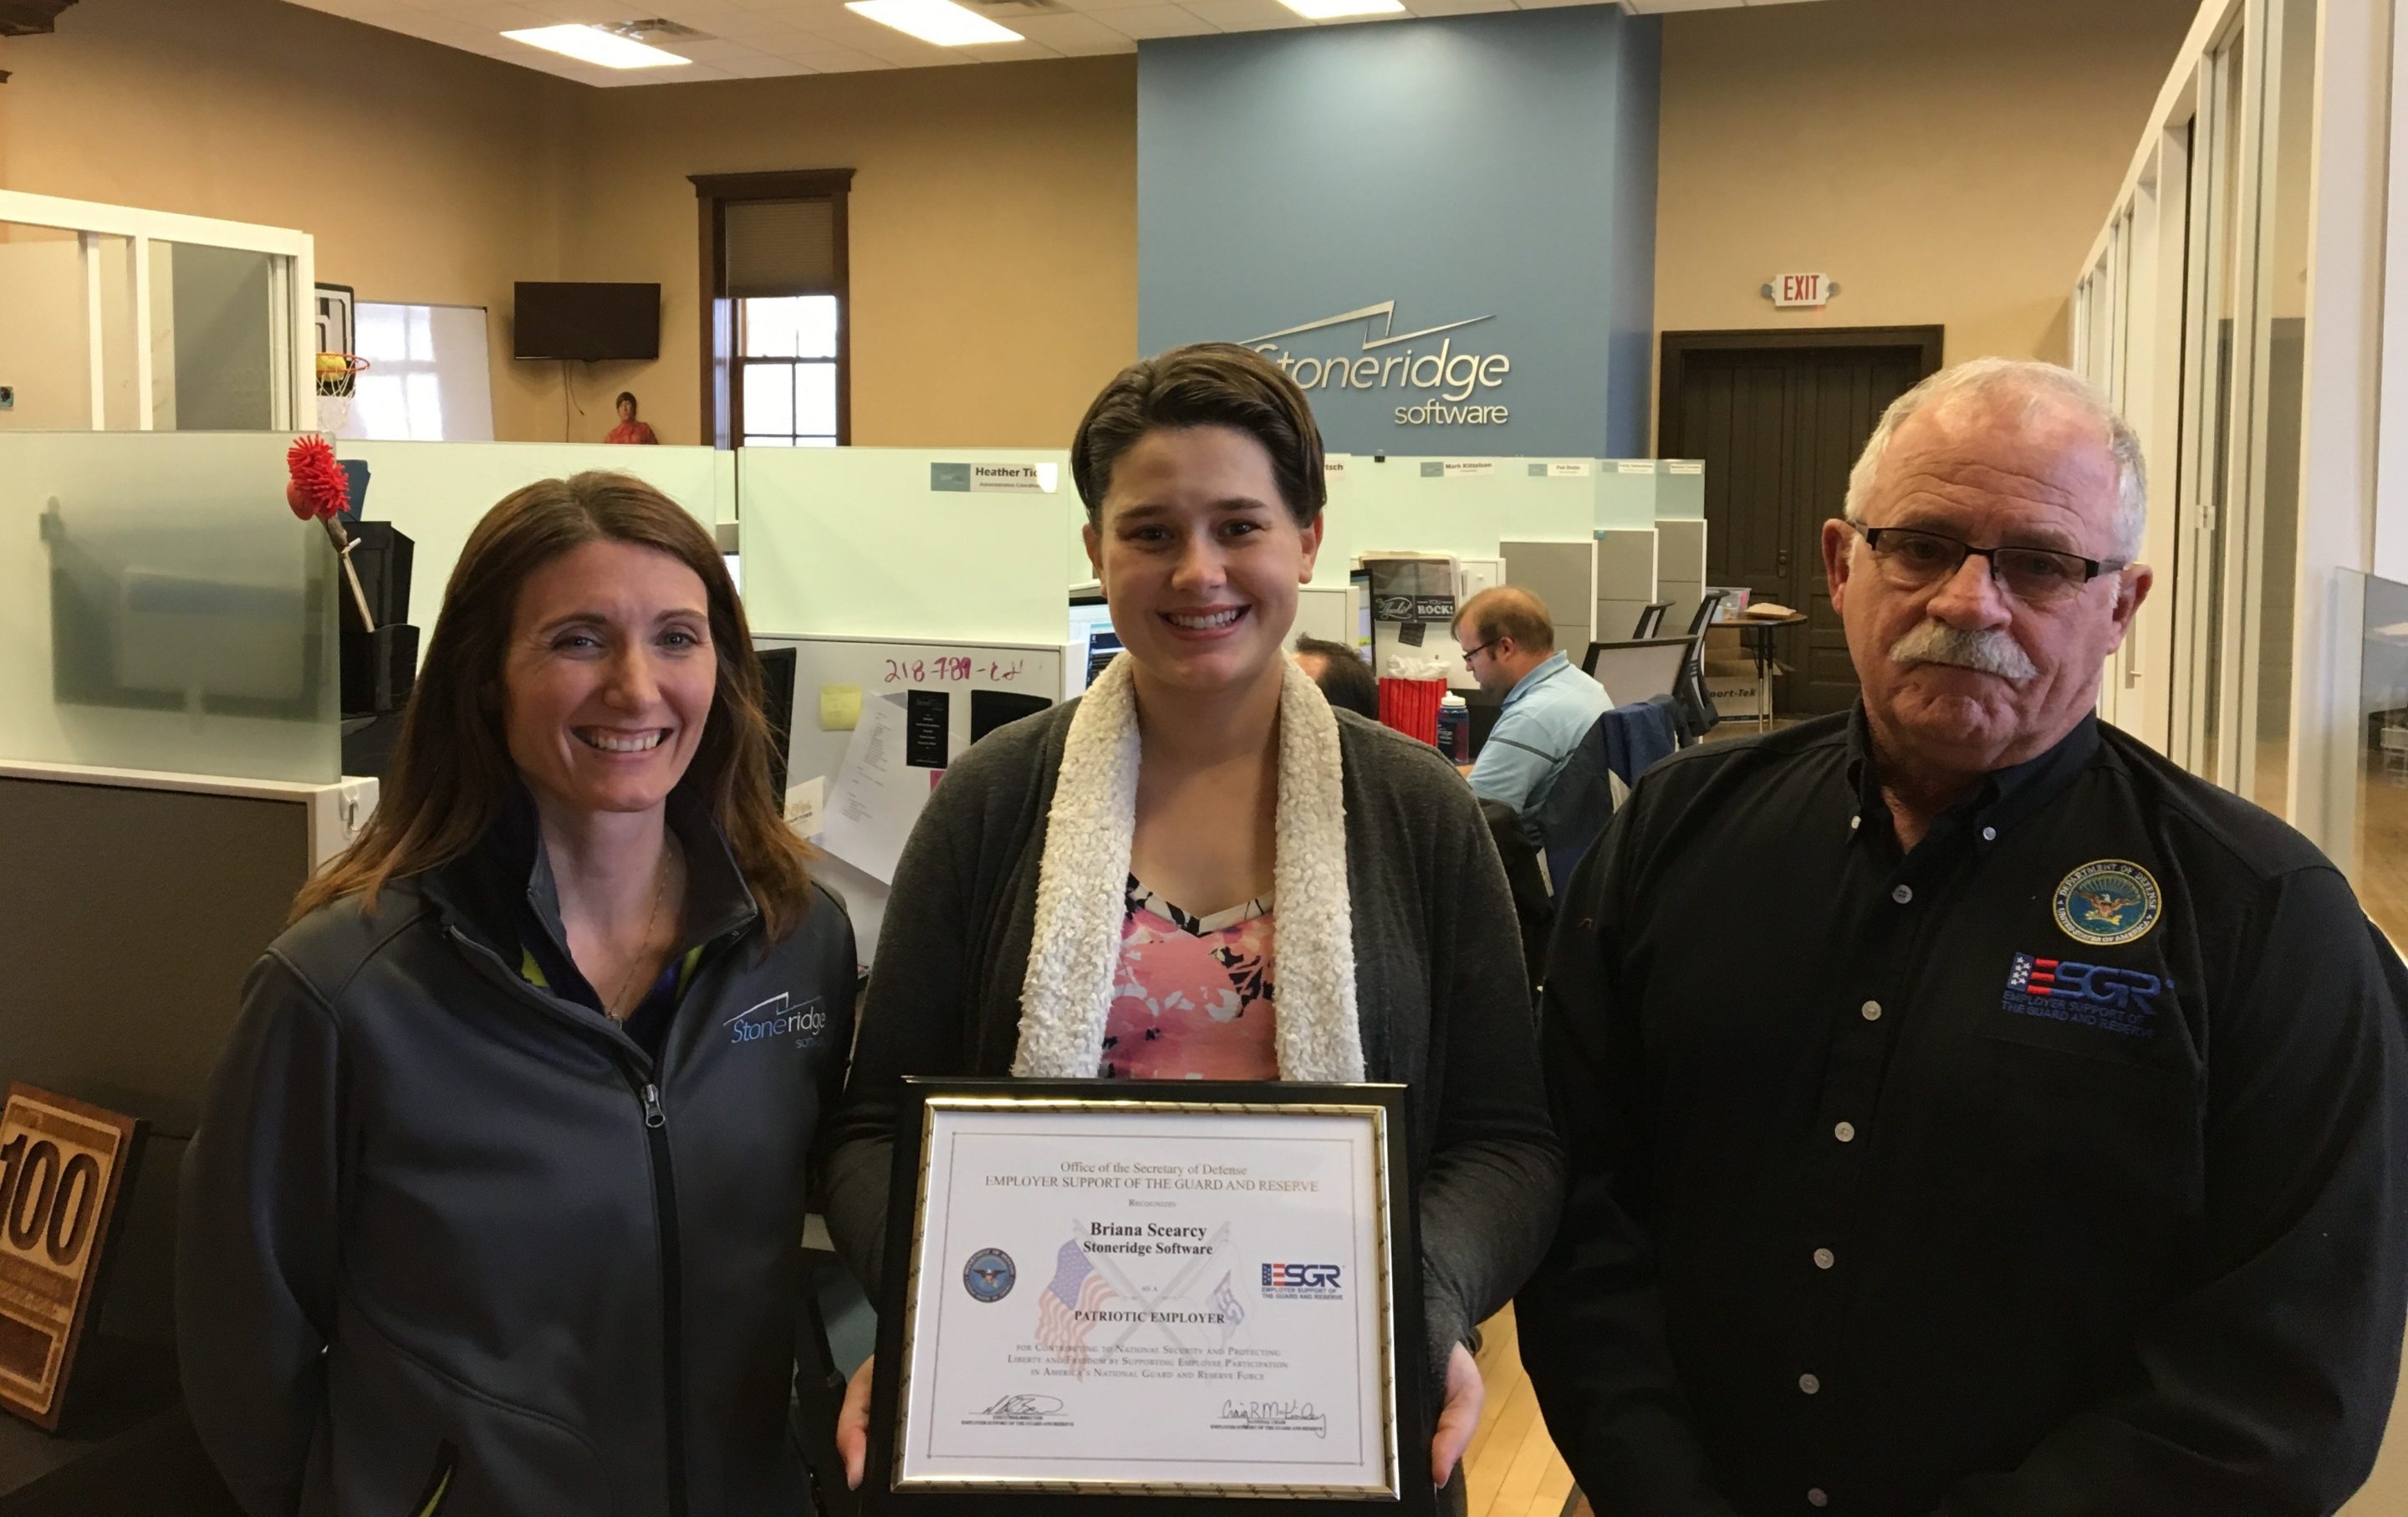 Stoneridge software chief people officer receives employer support patriot award